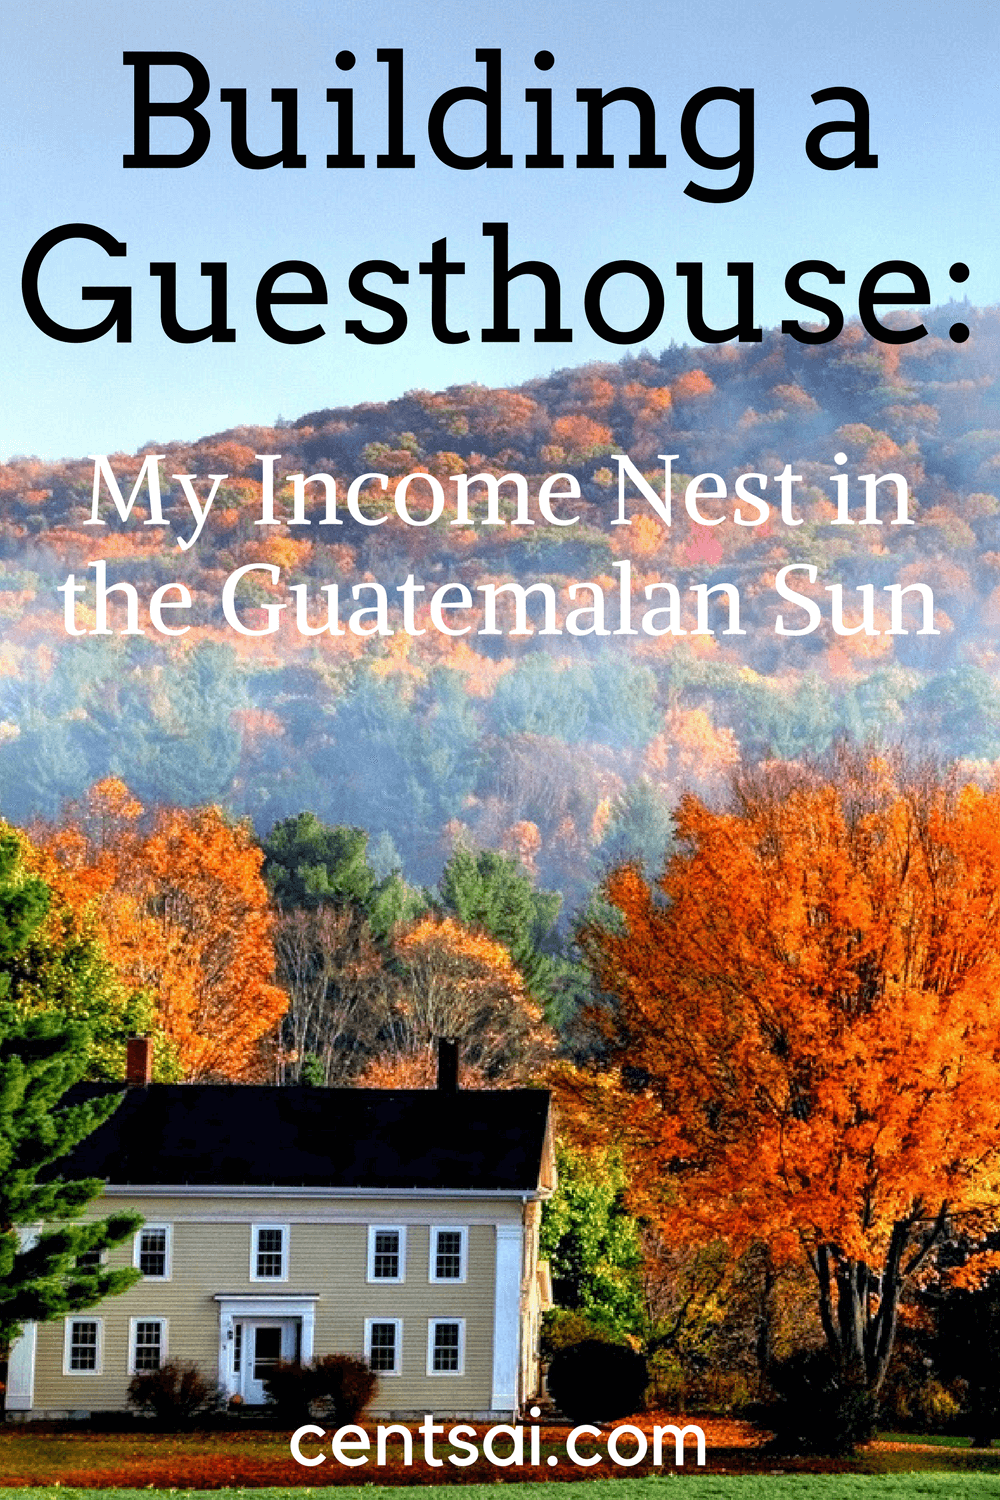 Building a Guesthouse My Income Nest in the Guatemalan Sun